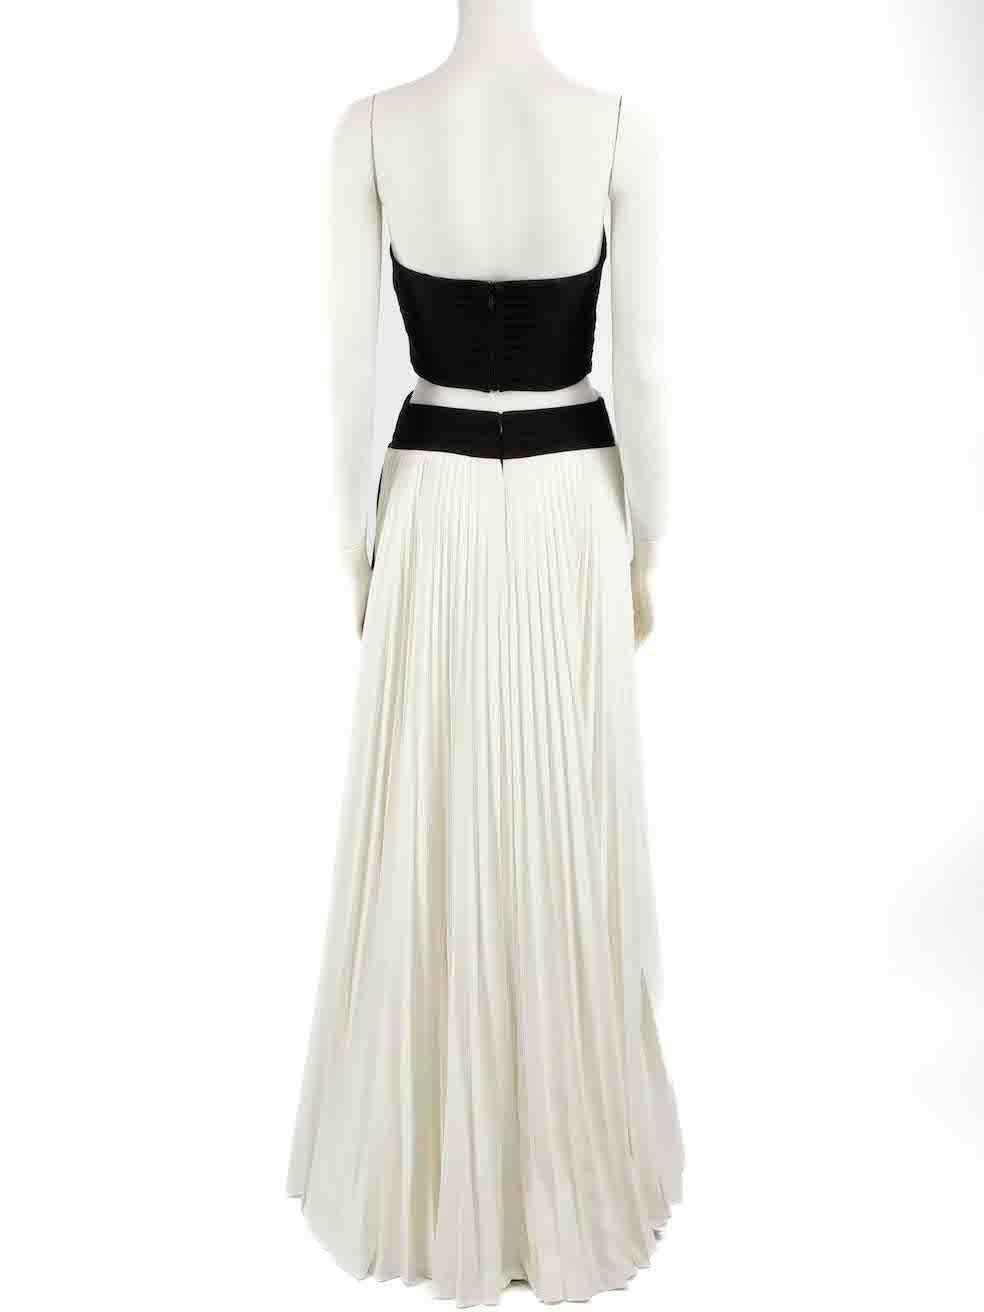 Women's Honayda S/S23 Black & White Strapless Pleated Gown Size S For Sale